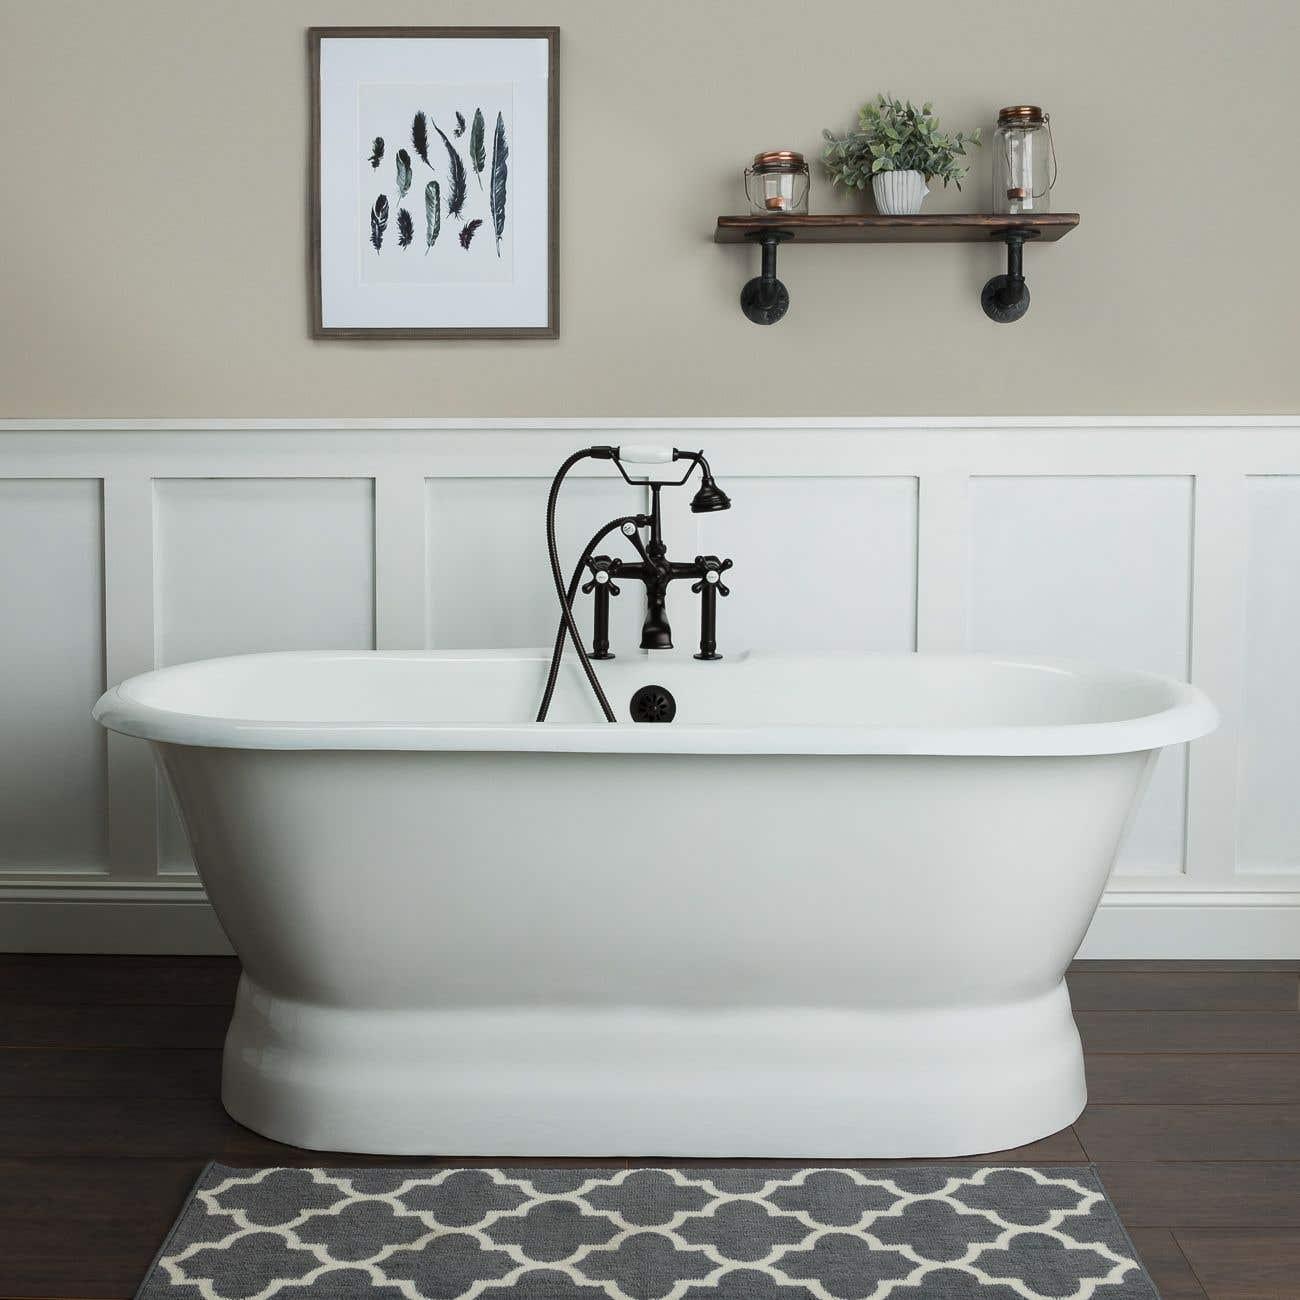 OXFORD CAST IRON DOUBLE ENDED PEDESTAL TUB